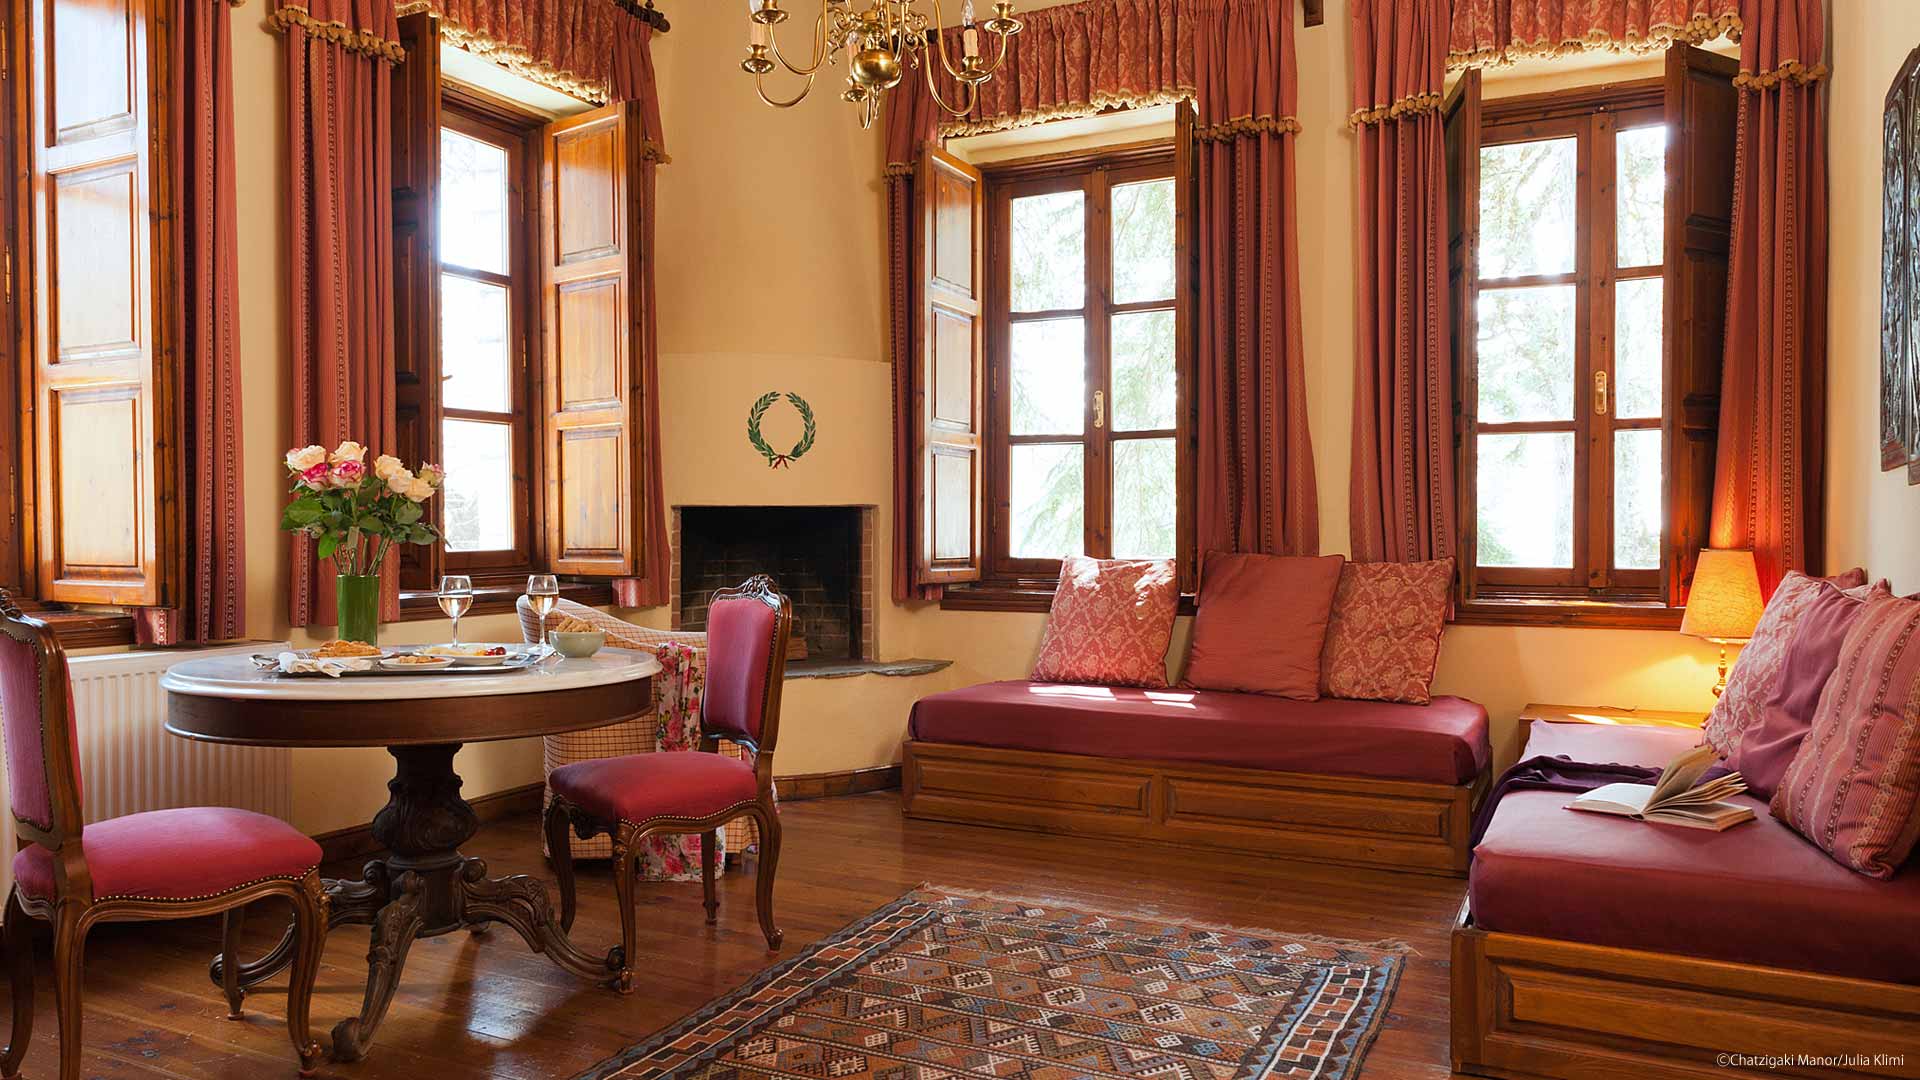 The Manor Suite at the Chatzigaki Manor